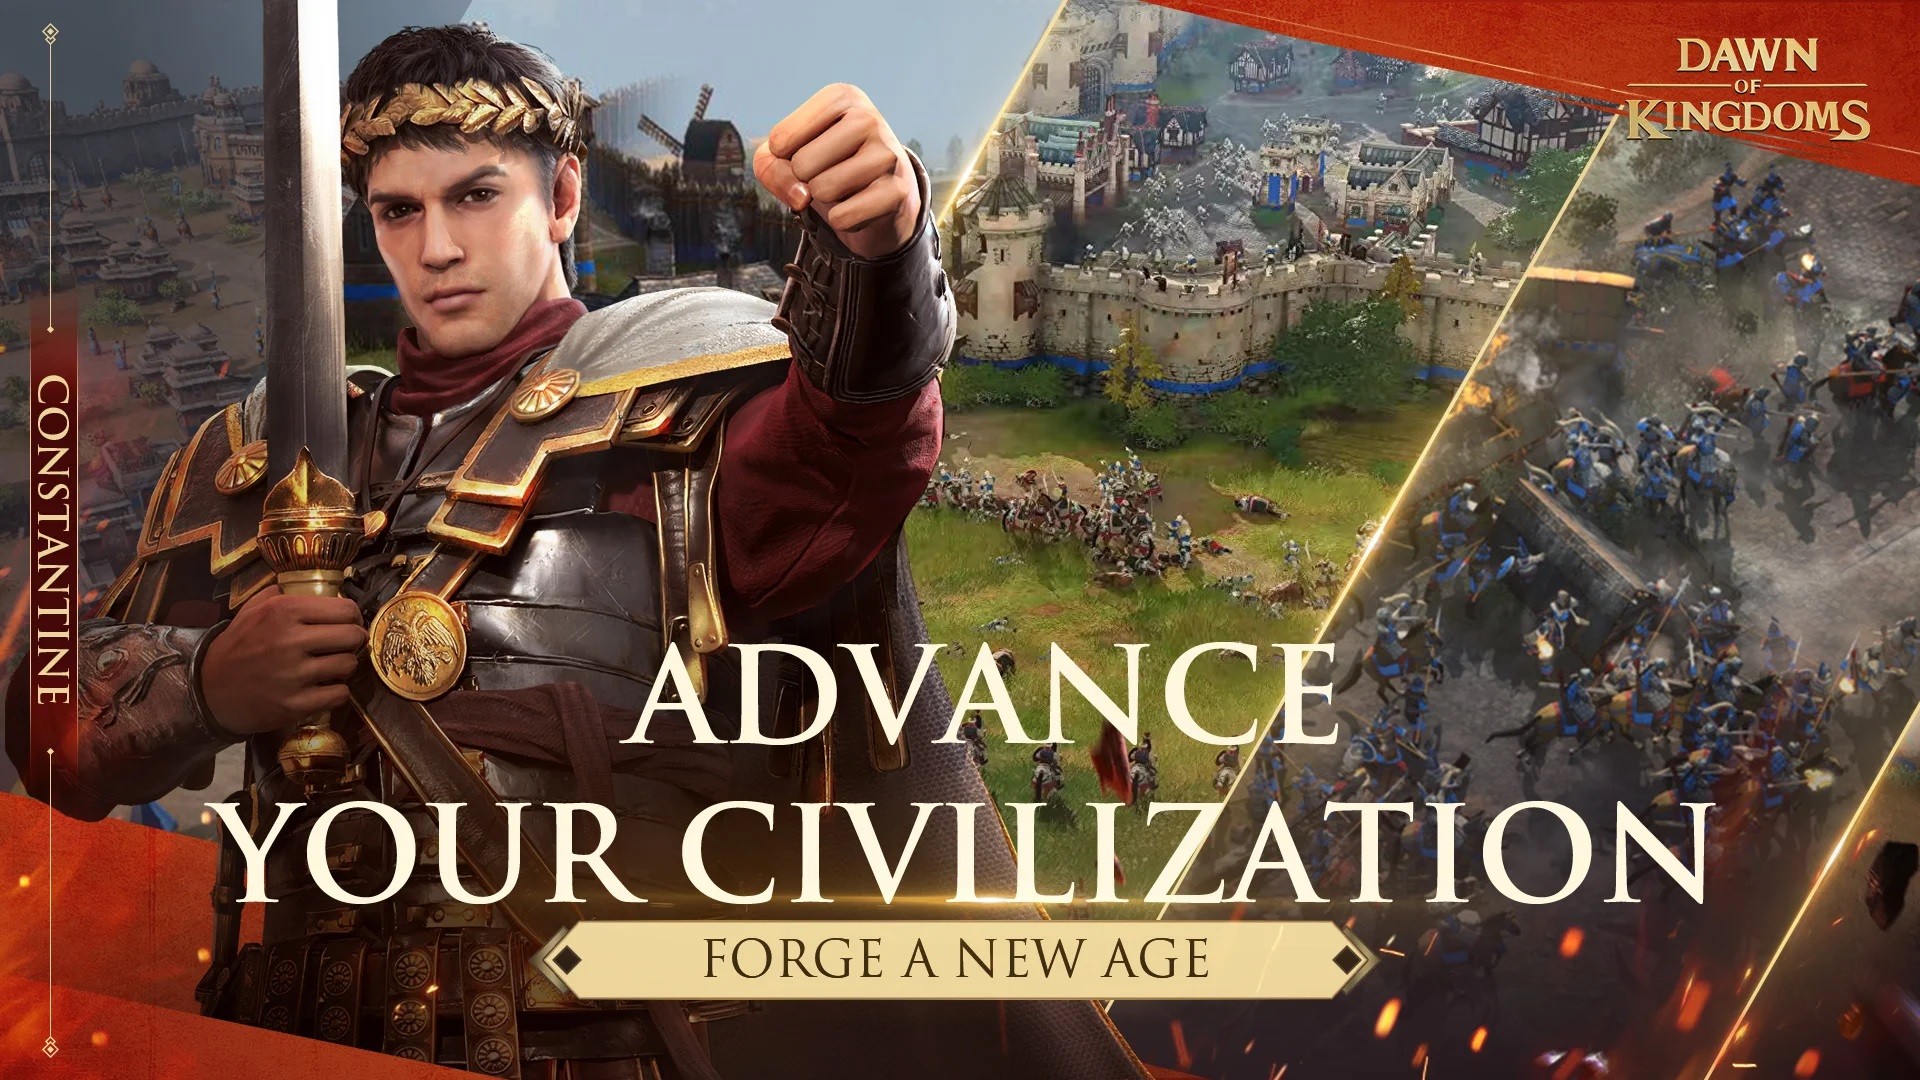 Everything You Can Expect From the New Dawn of Kingdoms Strategy War Game